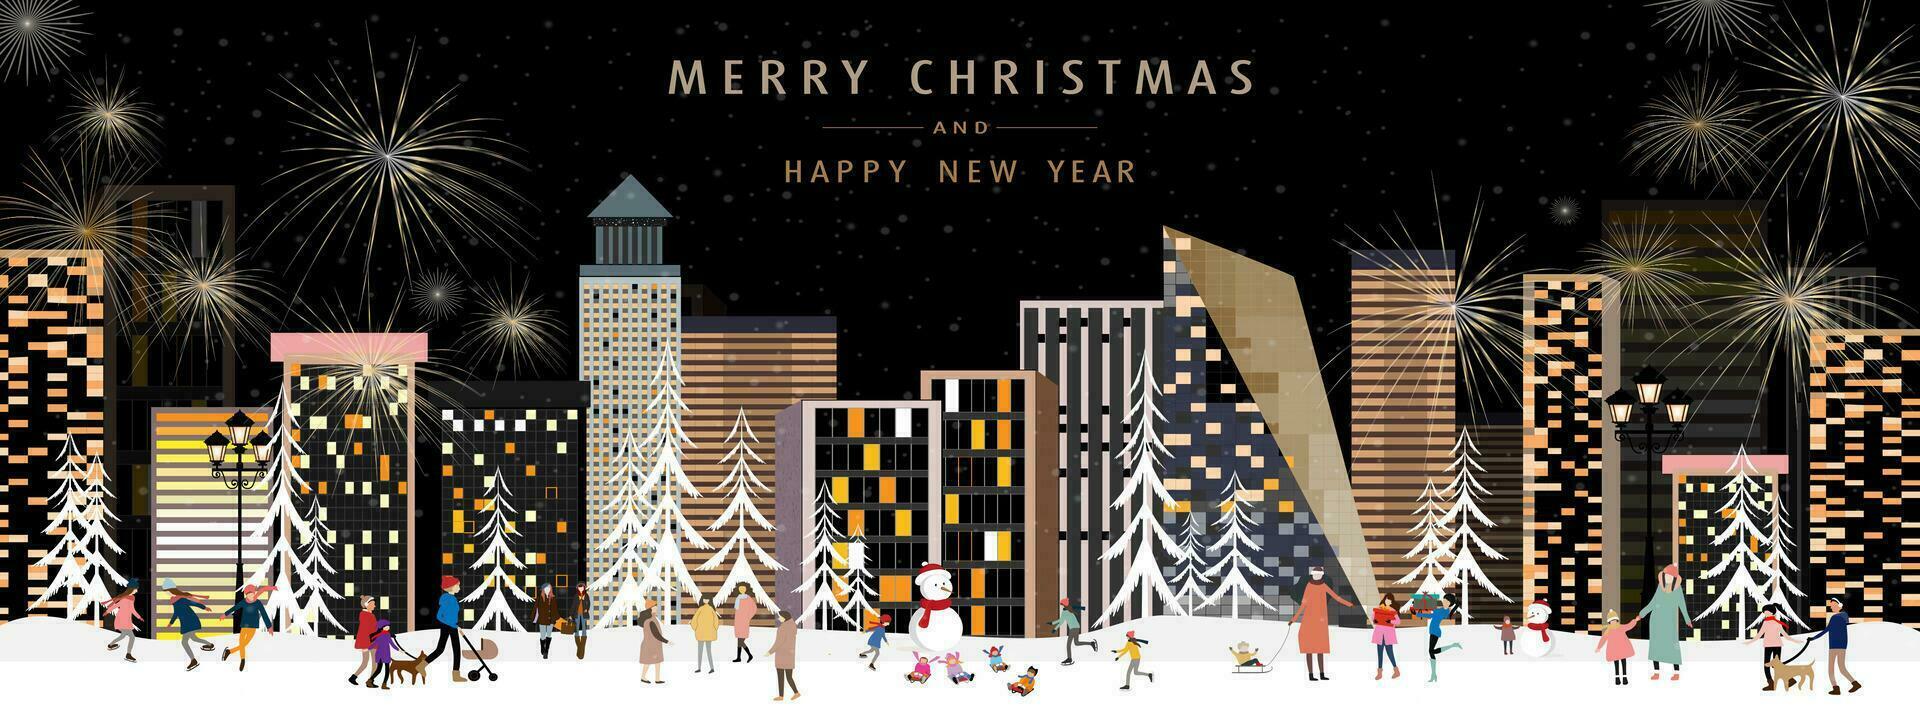 Winter city landscape people celebrating on Christmas night or New Year,Vector horizontal banner winter wonderland with firework on daek sky in the town with happy kids playing in the park vector